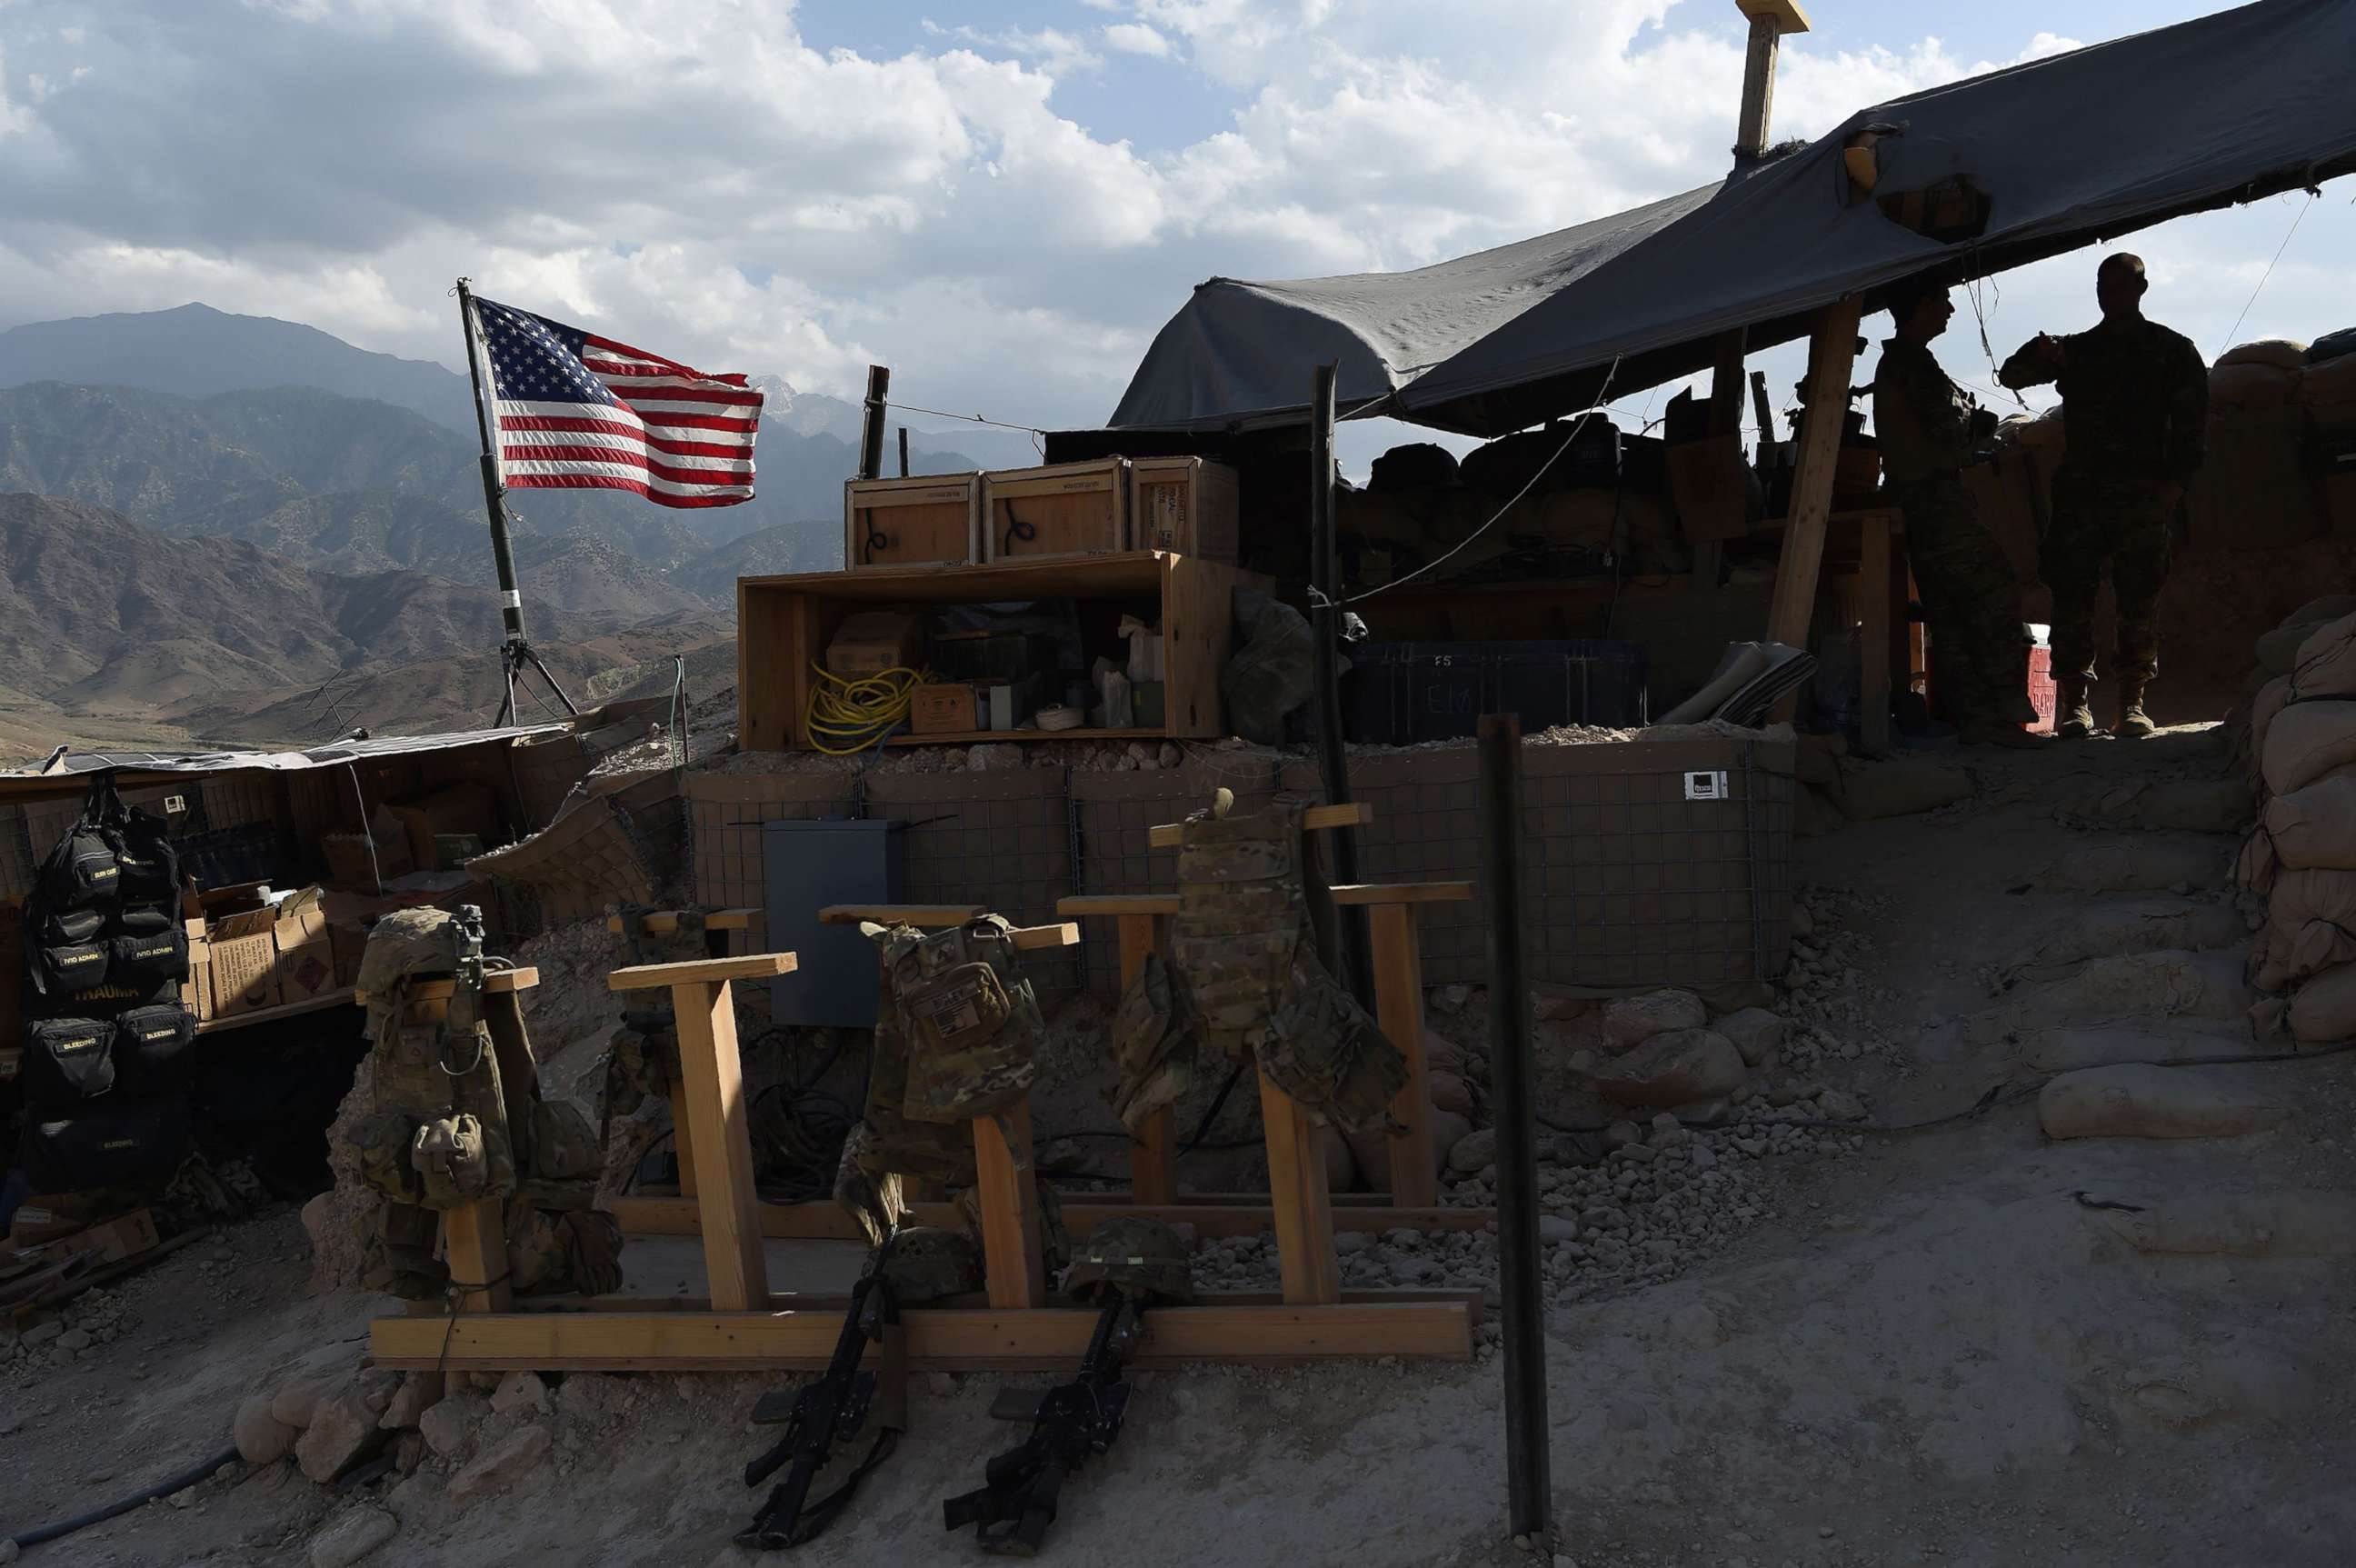 PHOTO: US Army soldiers from NATO look on as U.S. flag flies at a checkpoint during a patrol against Islamic State militants at the Deh Bala district in the eastern province of Nangarhar Province, Afghanistan, July 7, 2018.